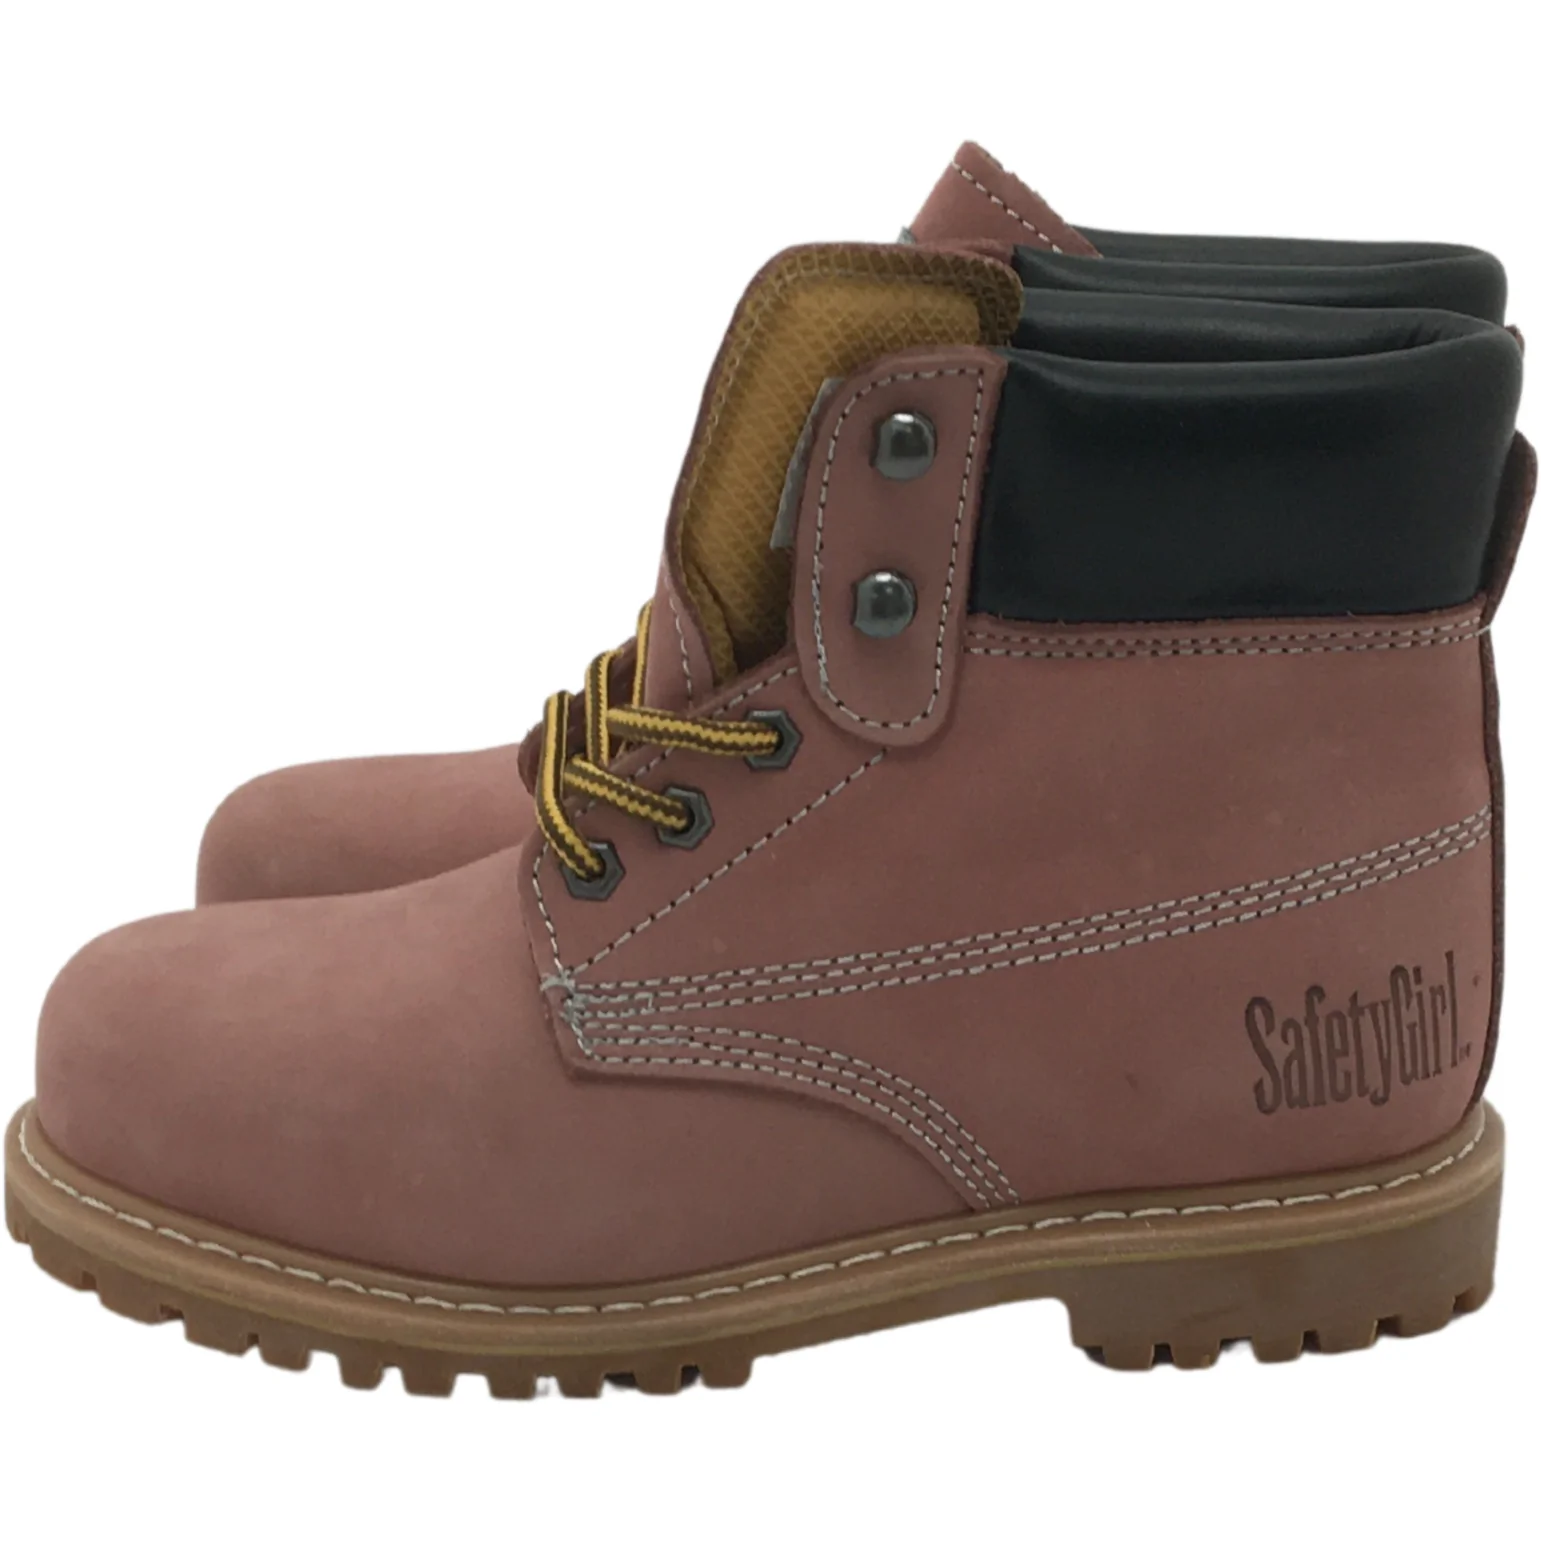 Safety Girl Women's Safety Boots / Work boots / Waterproof / Pink / Size 7.5M**No Tags**